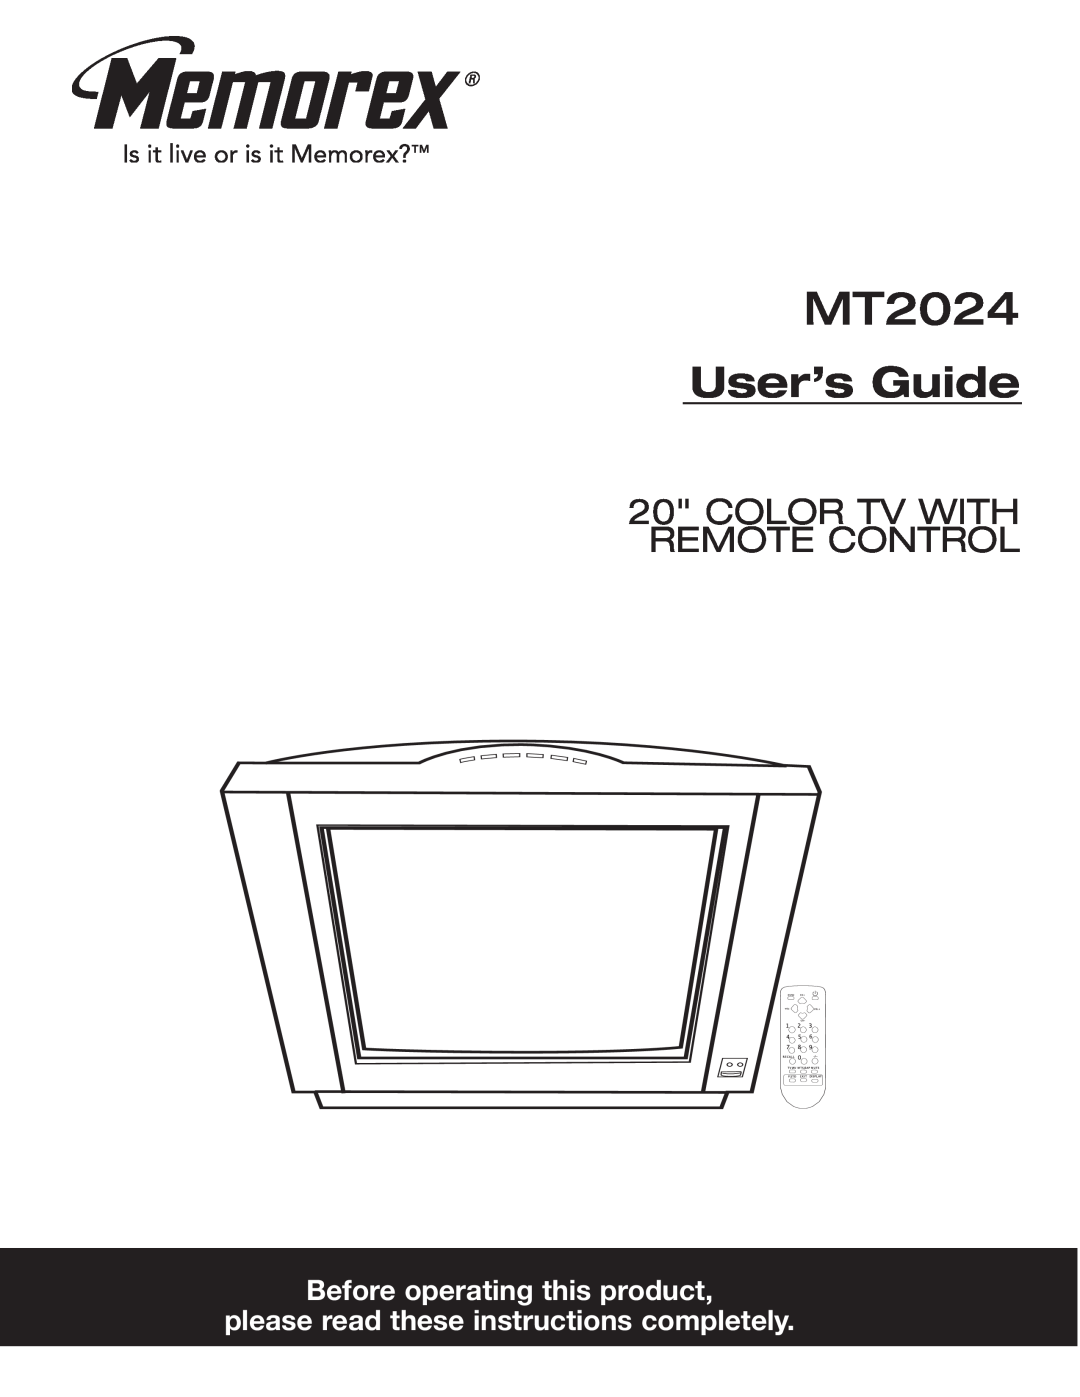 Memorex MT2024 manual User’s Guide, Color Tv With Remote Control, Before operating this product 